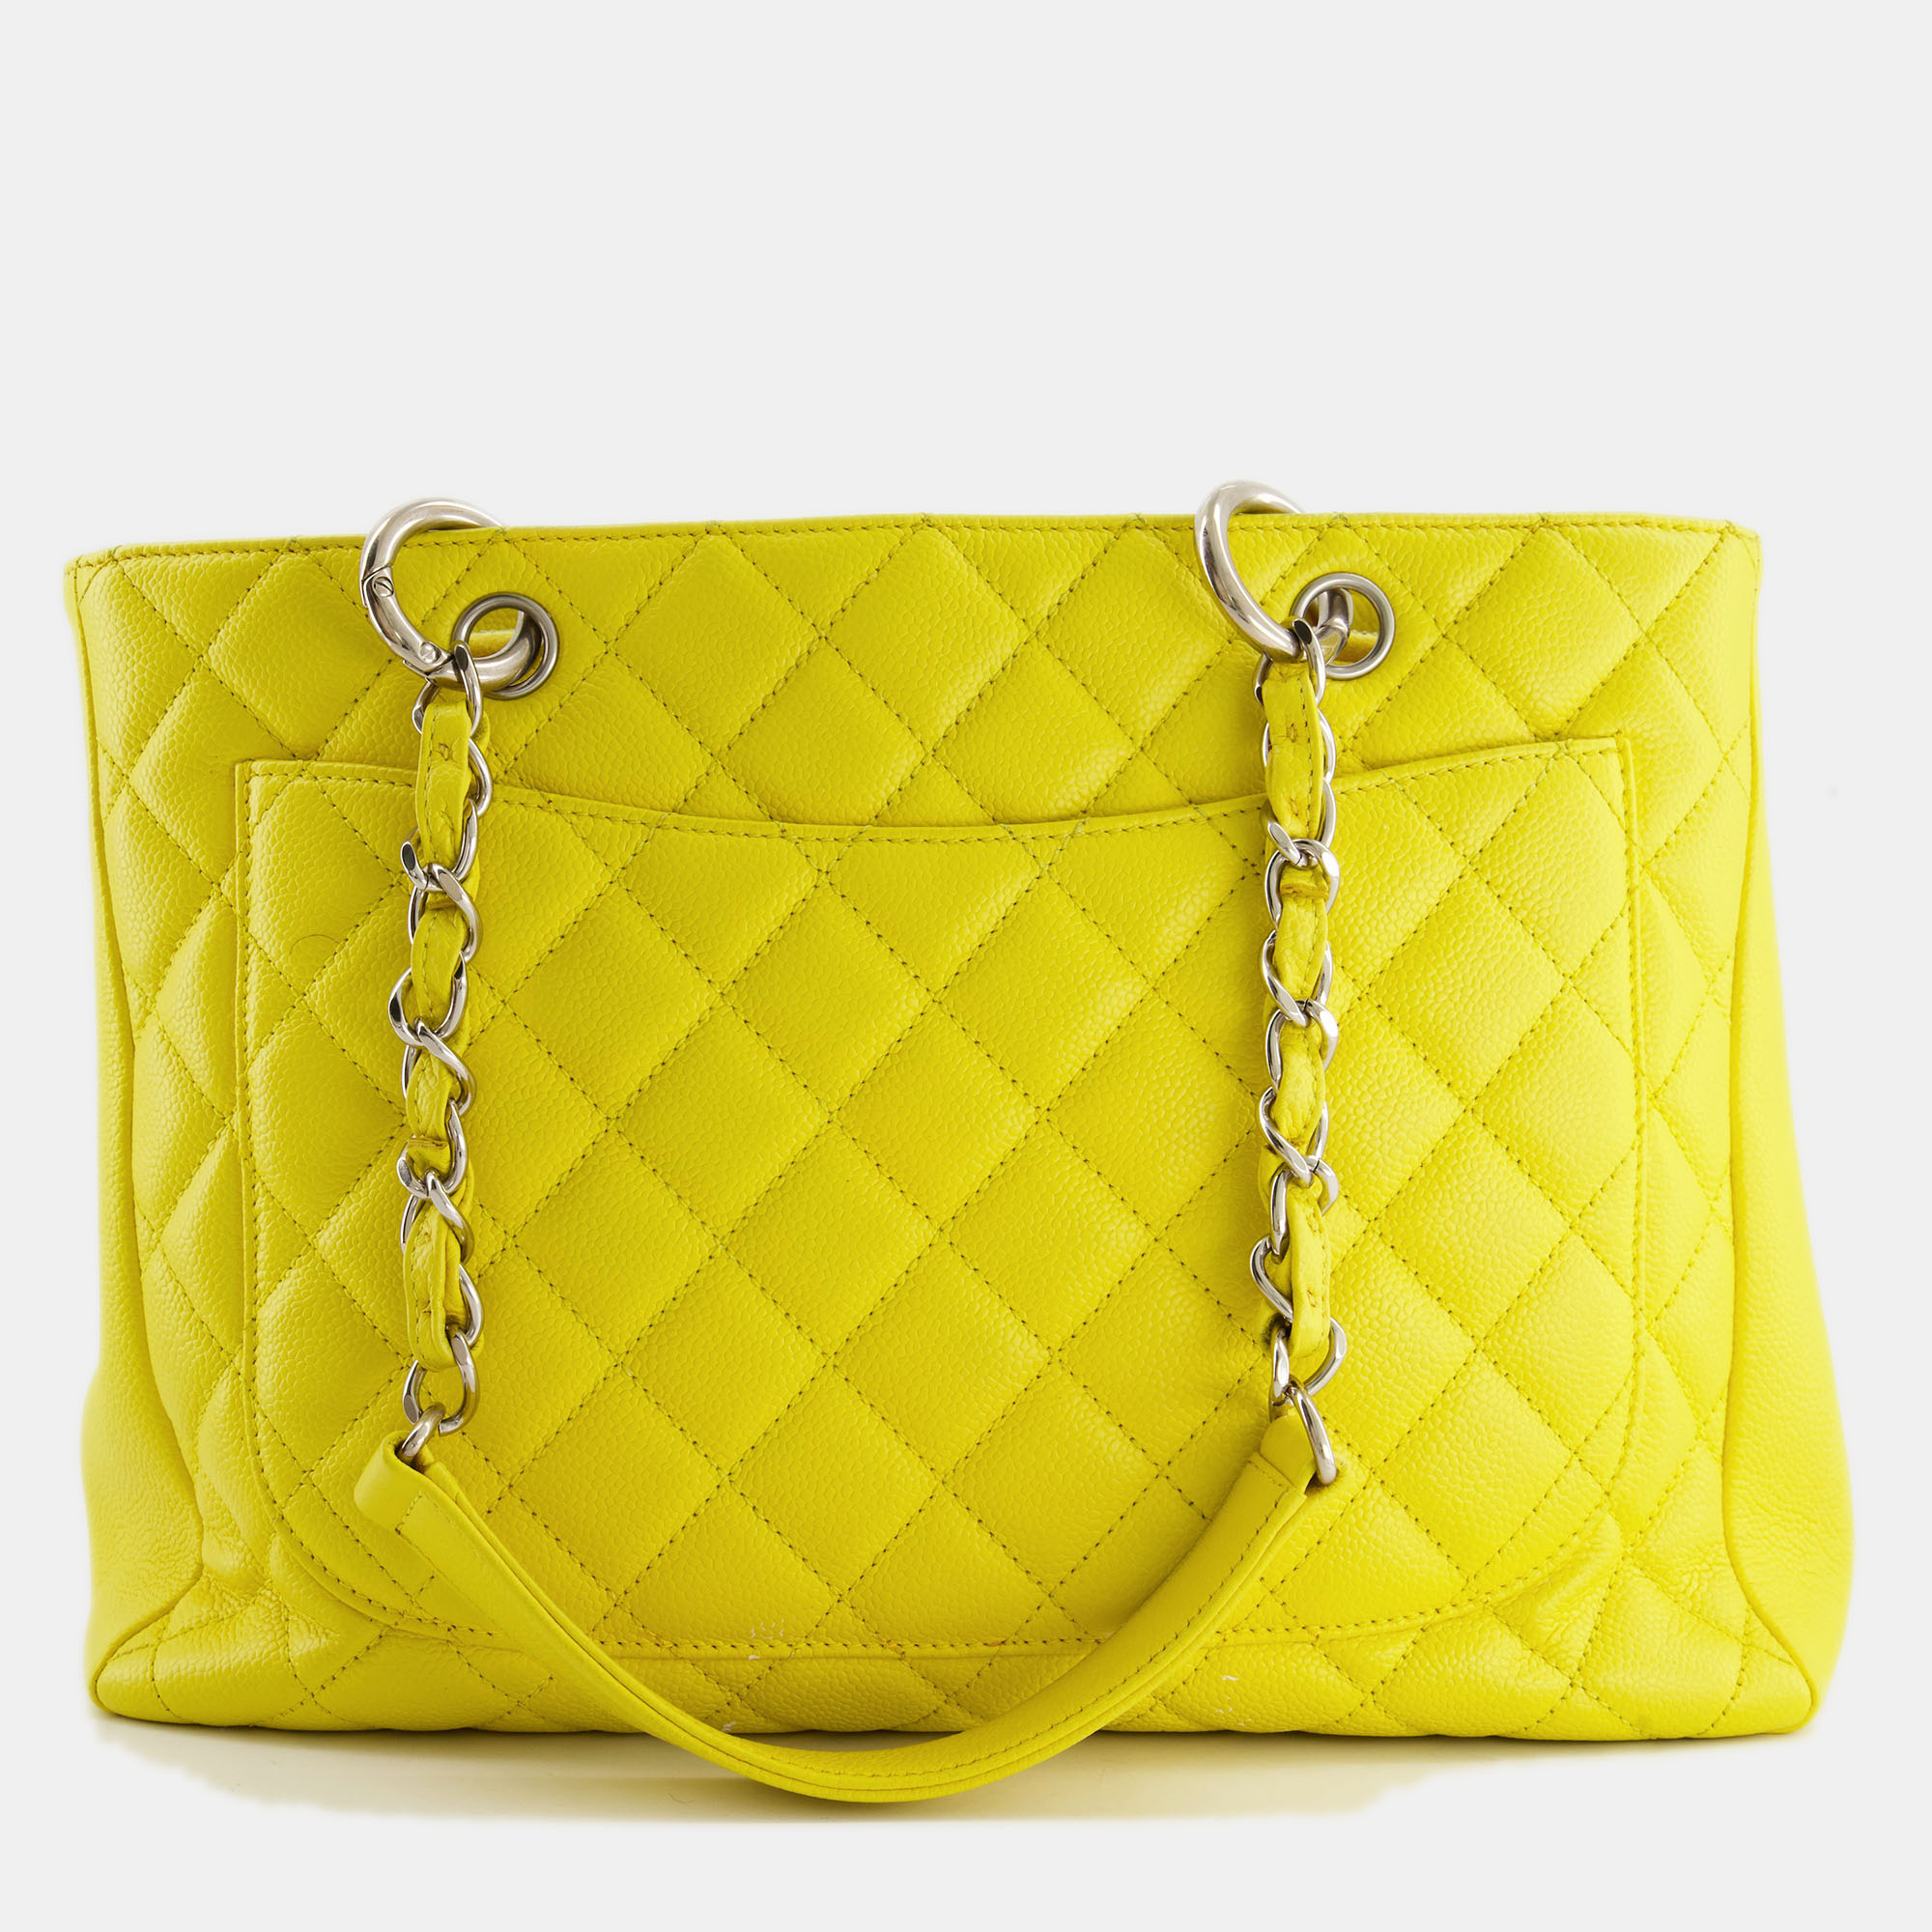 Chanel Canary Yellow GST Grand Shopper Tote Bag In Caviar Leather With Silver Hardware